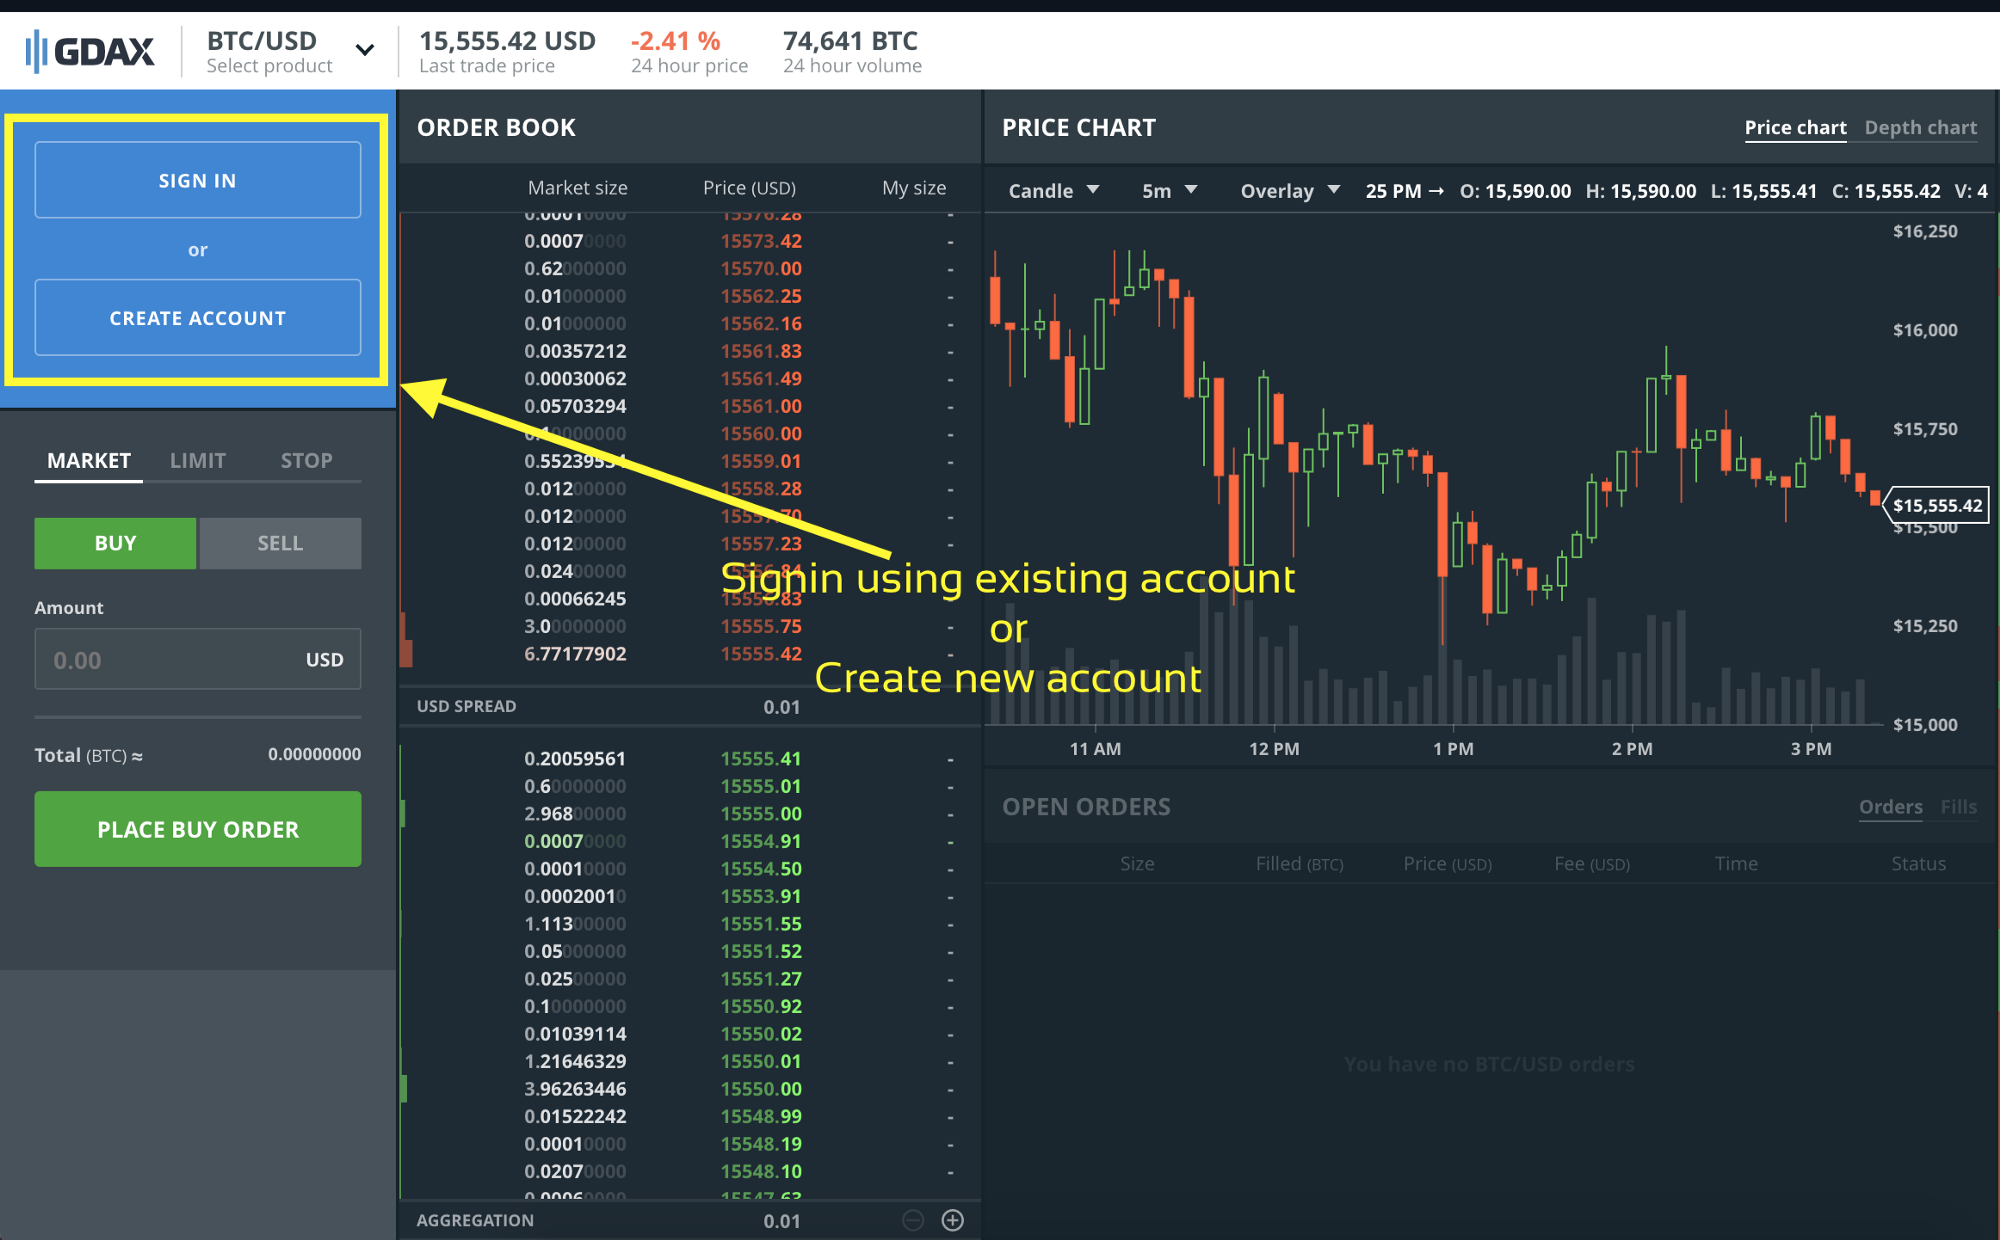 can i buy bitcoin on gdax with a credit card